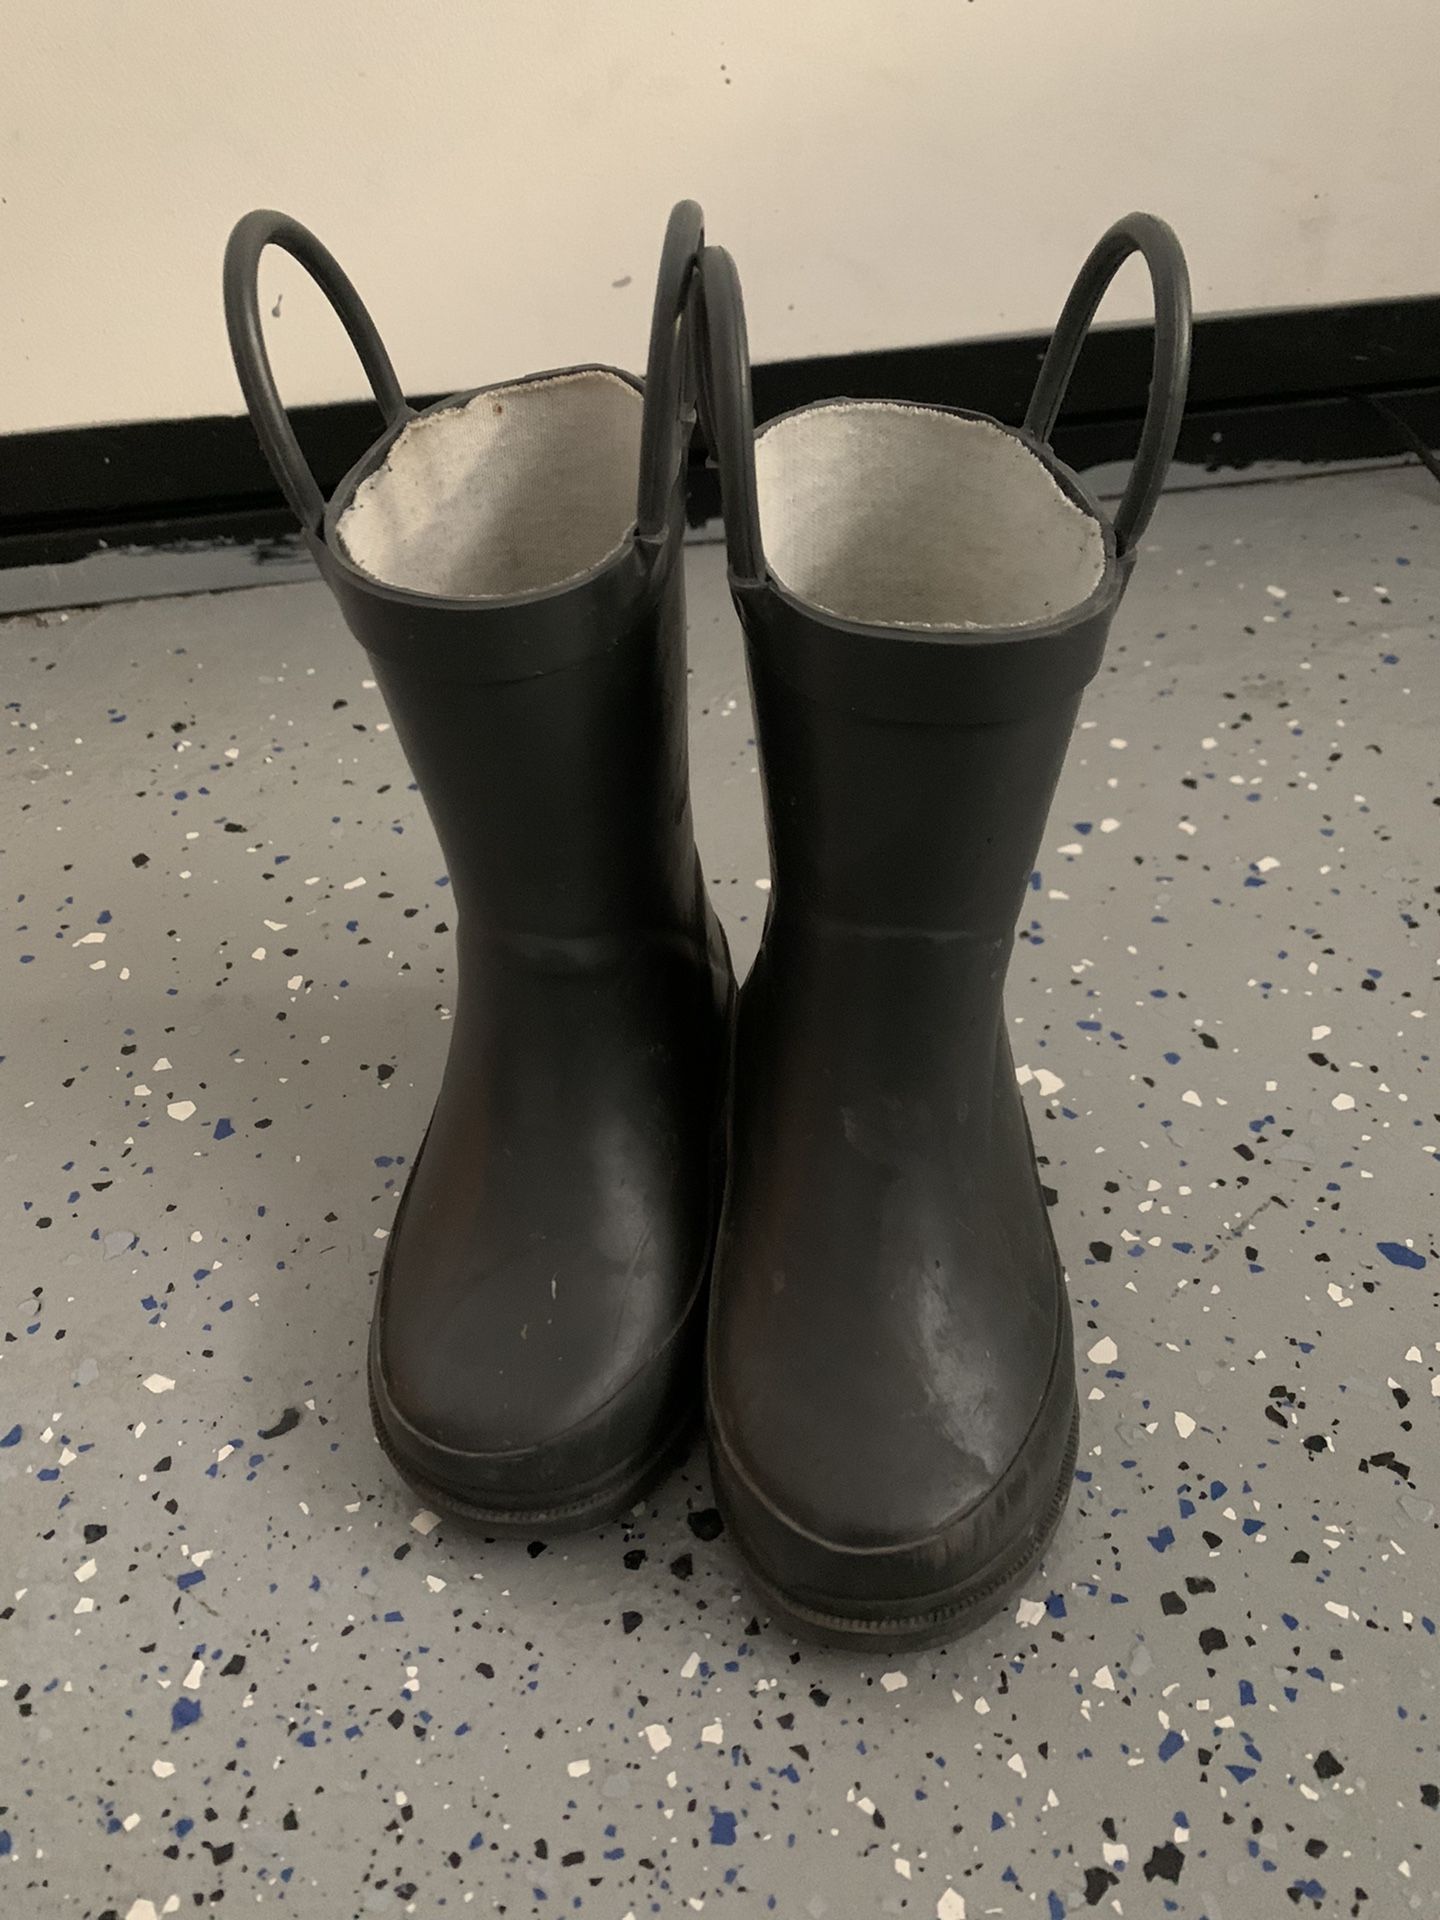 Toddler Rain Boots (size 5/6)